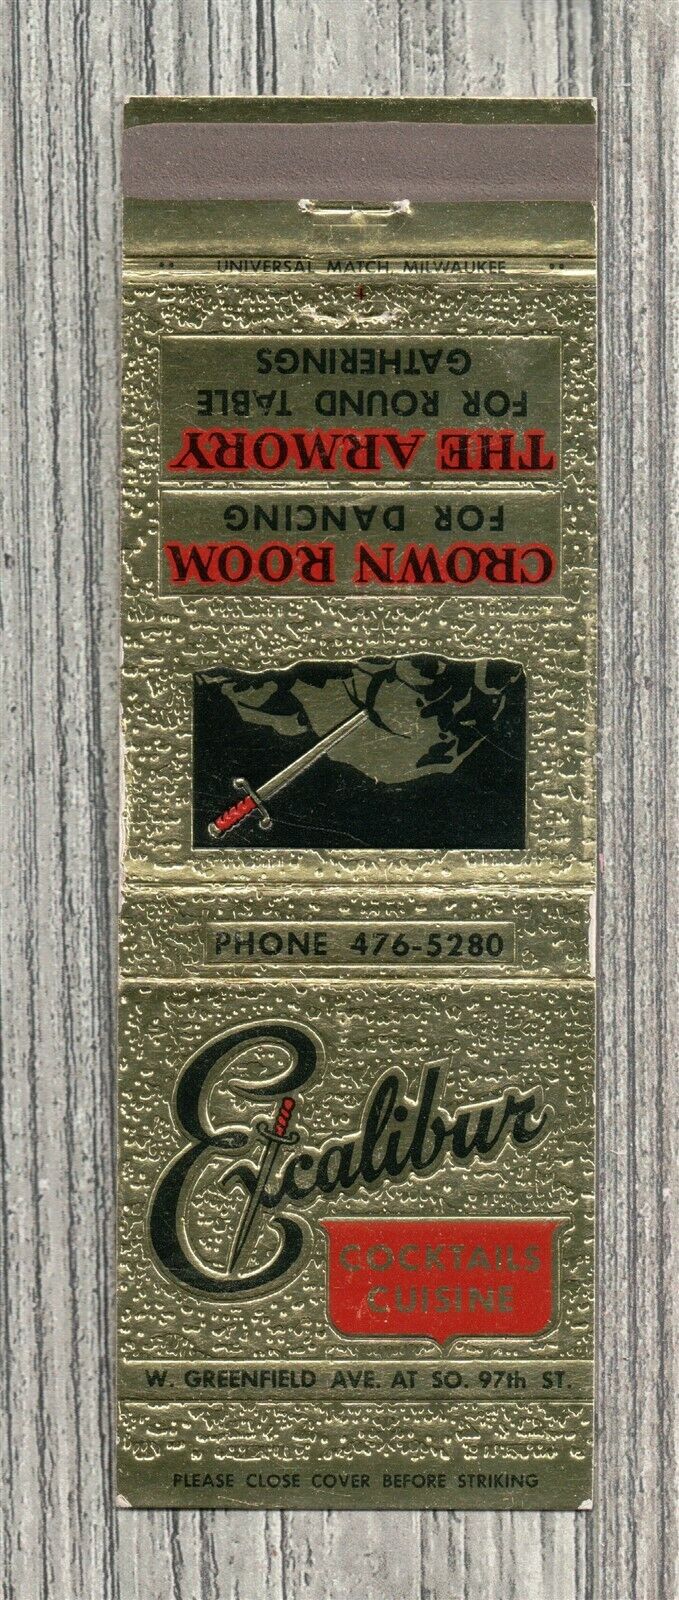 Matchbook Cover-Excalibur Restaurant West Greenfield Ave-1337